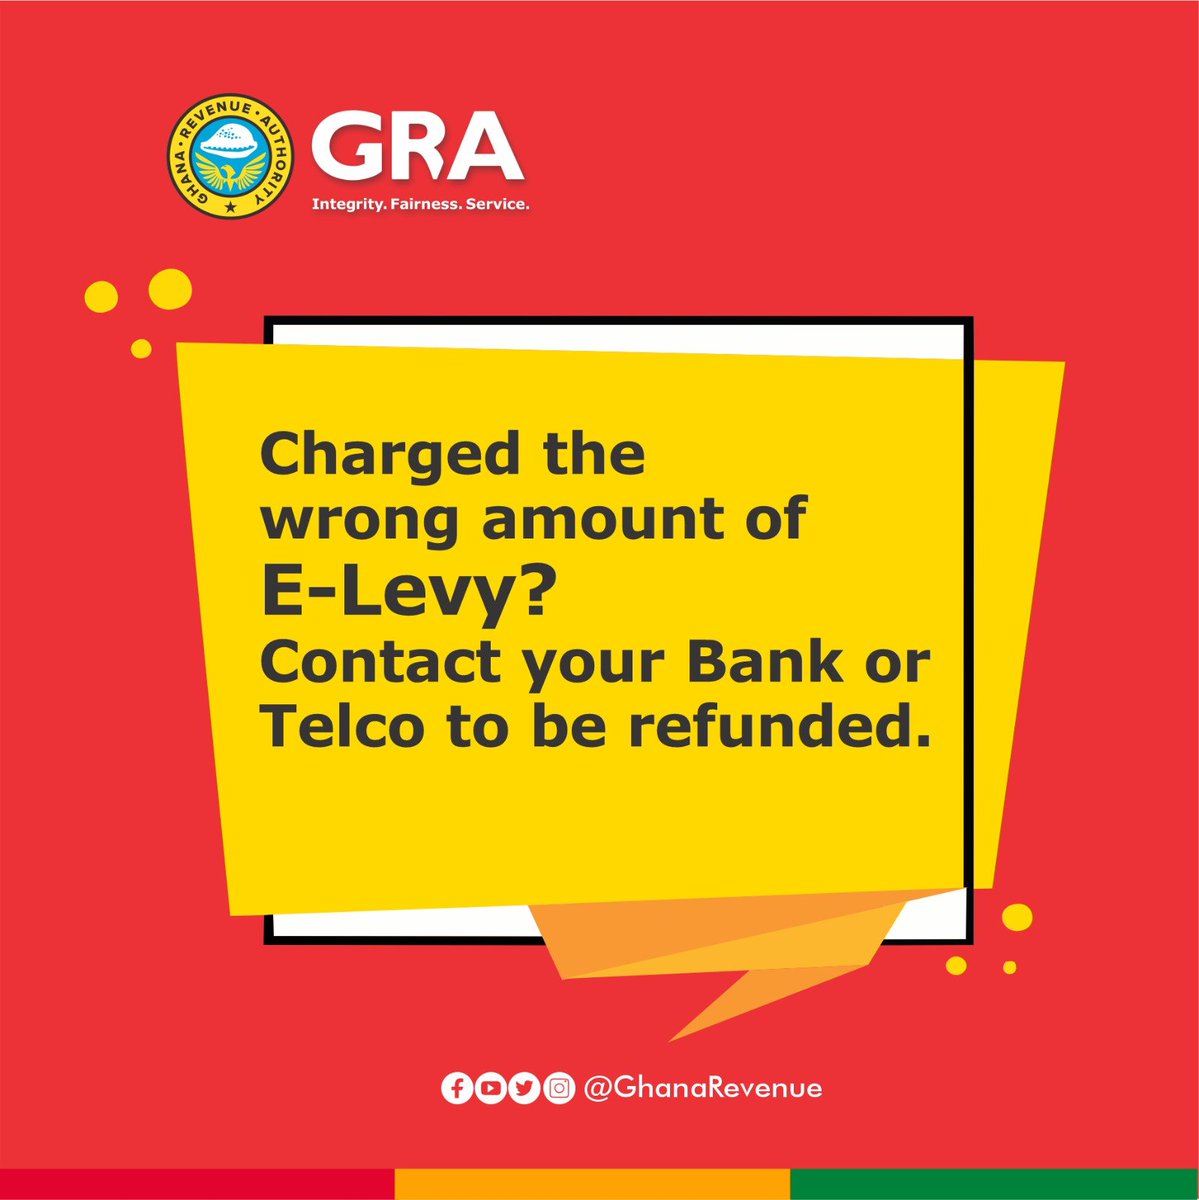 Have you been wrongly charged E-Levy?? 
Do not contact the GRA for the refund. Contact the bank/telco you transferred from to be refunded. 
#ELevy #GhanaRevenue #TaxEducation